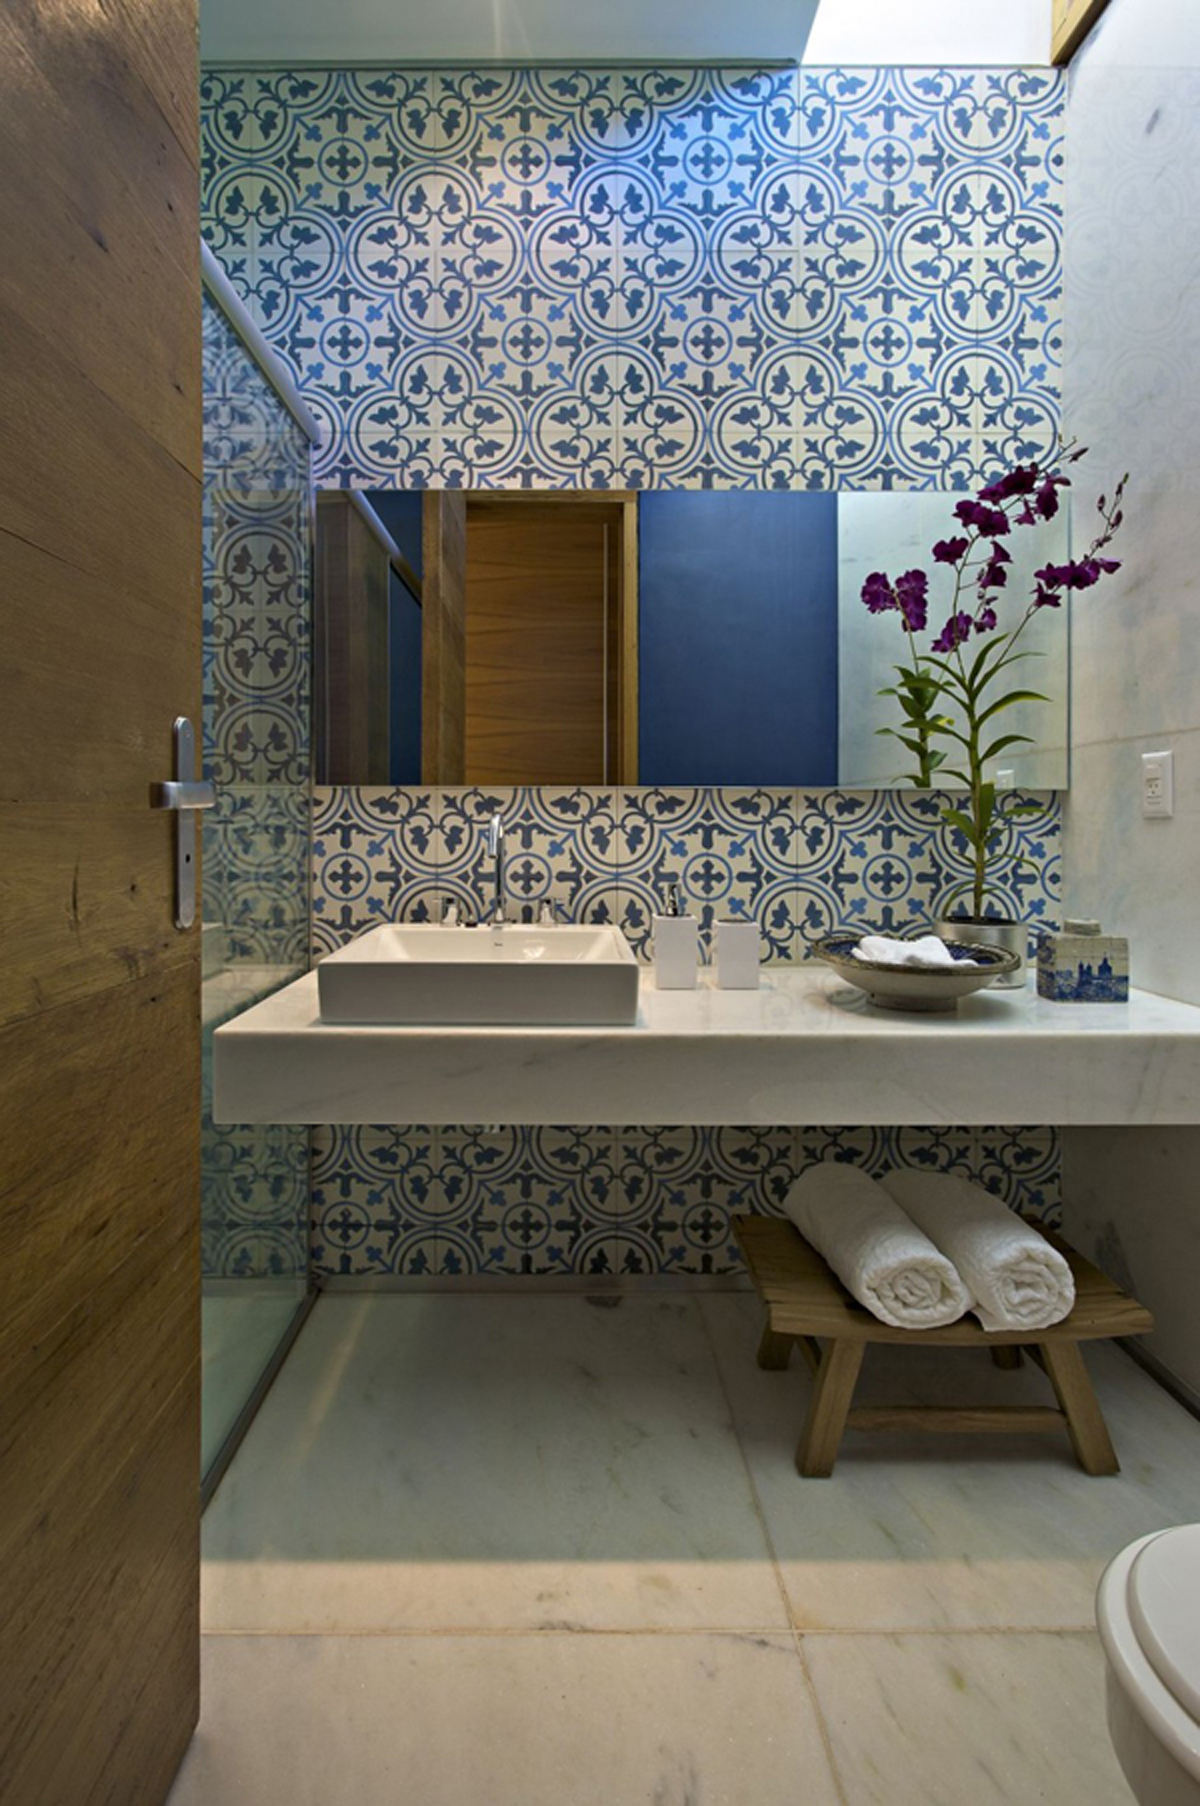 Unique Wall Paper In Small Traditional Bathroom Design With Mirror